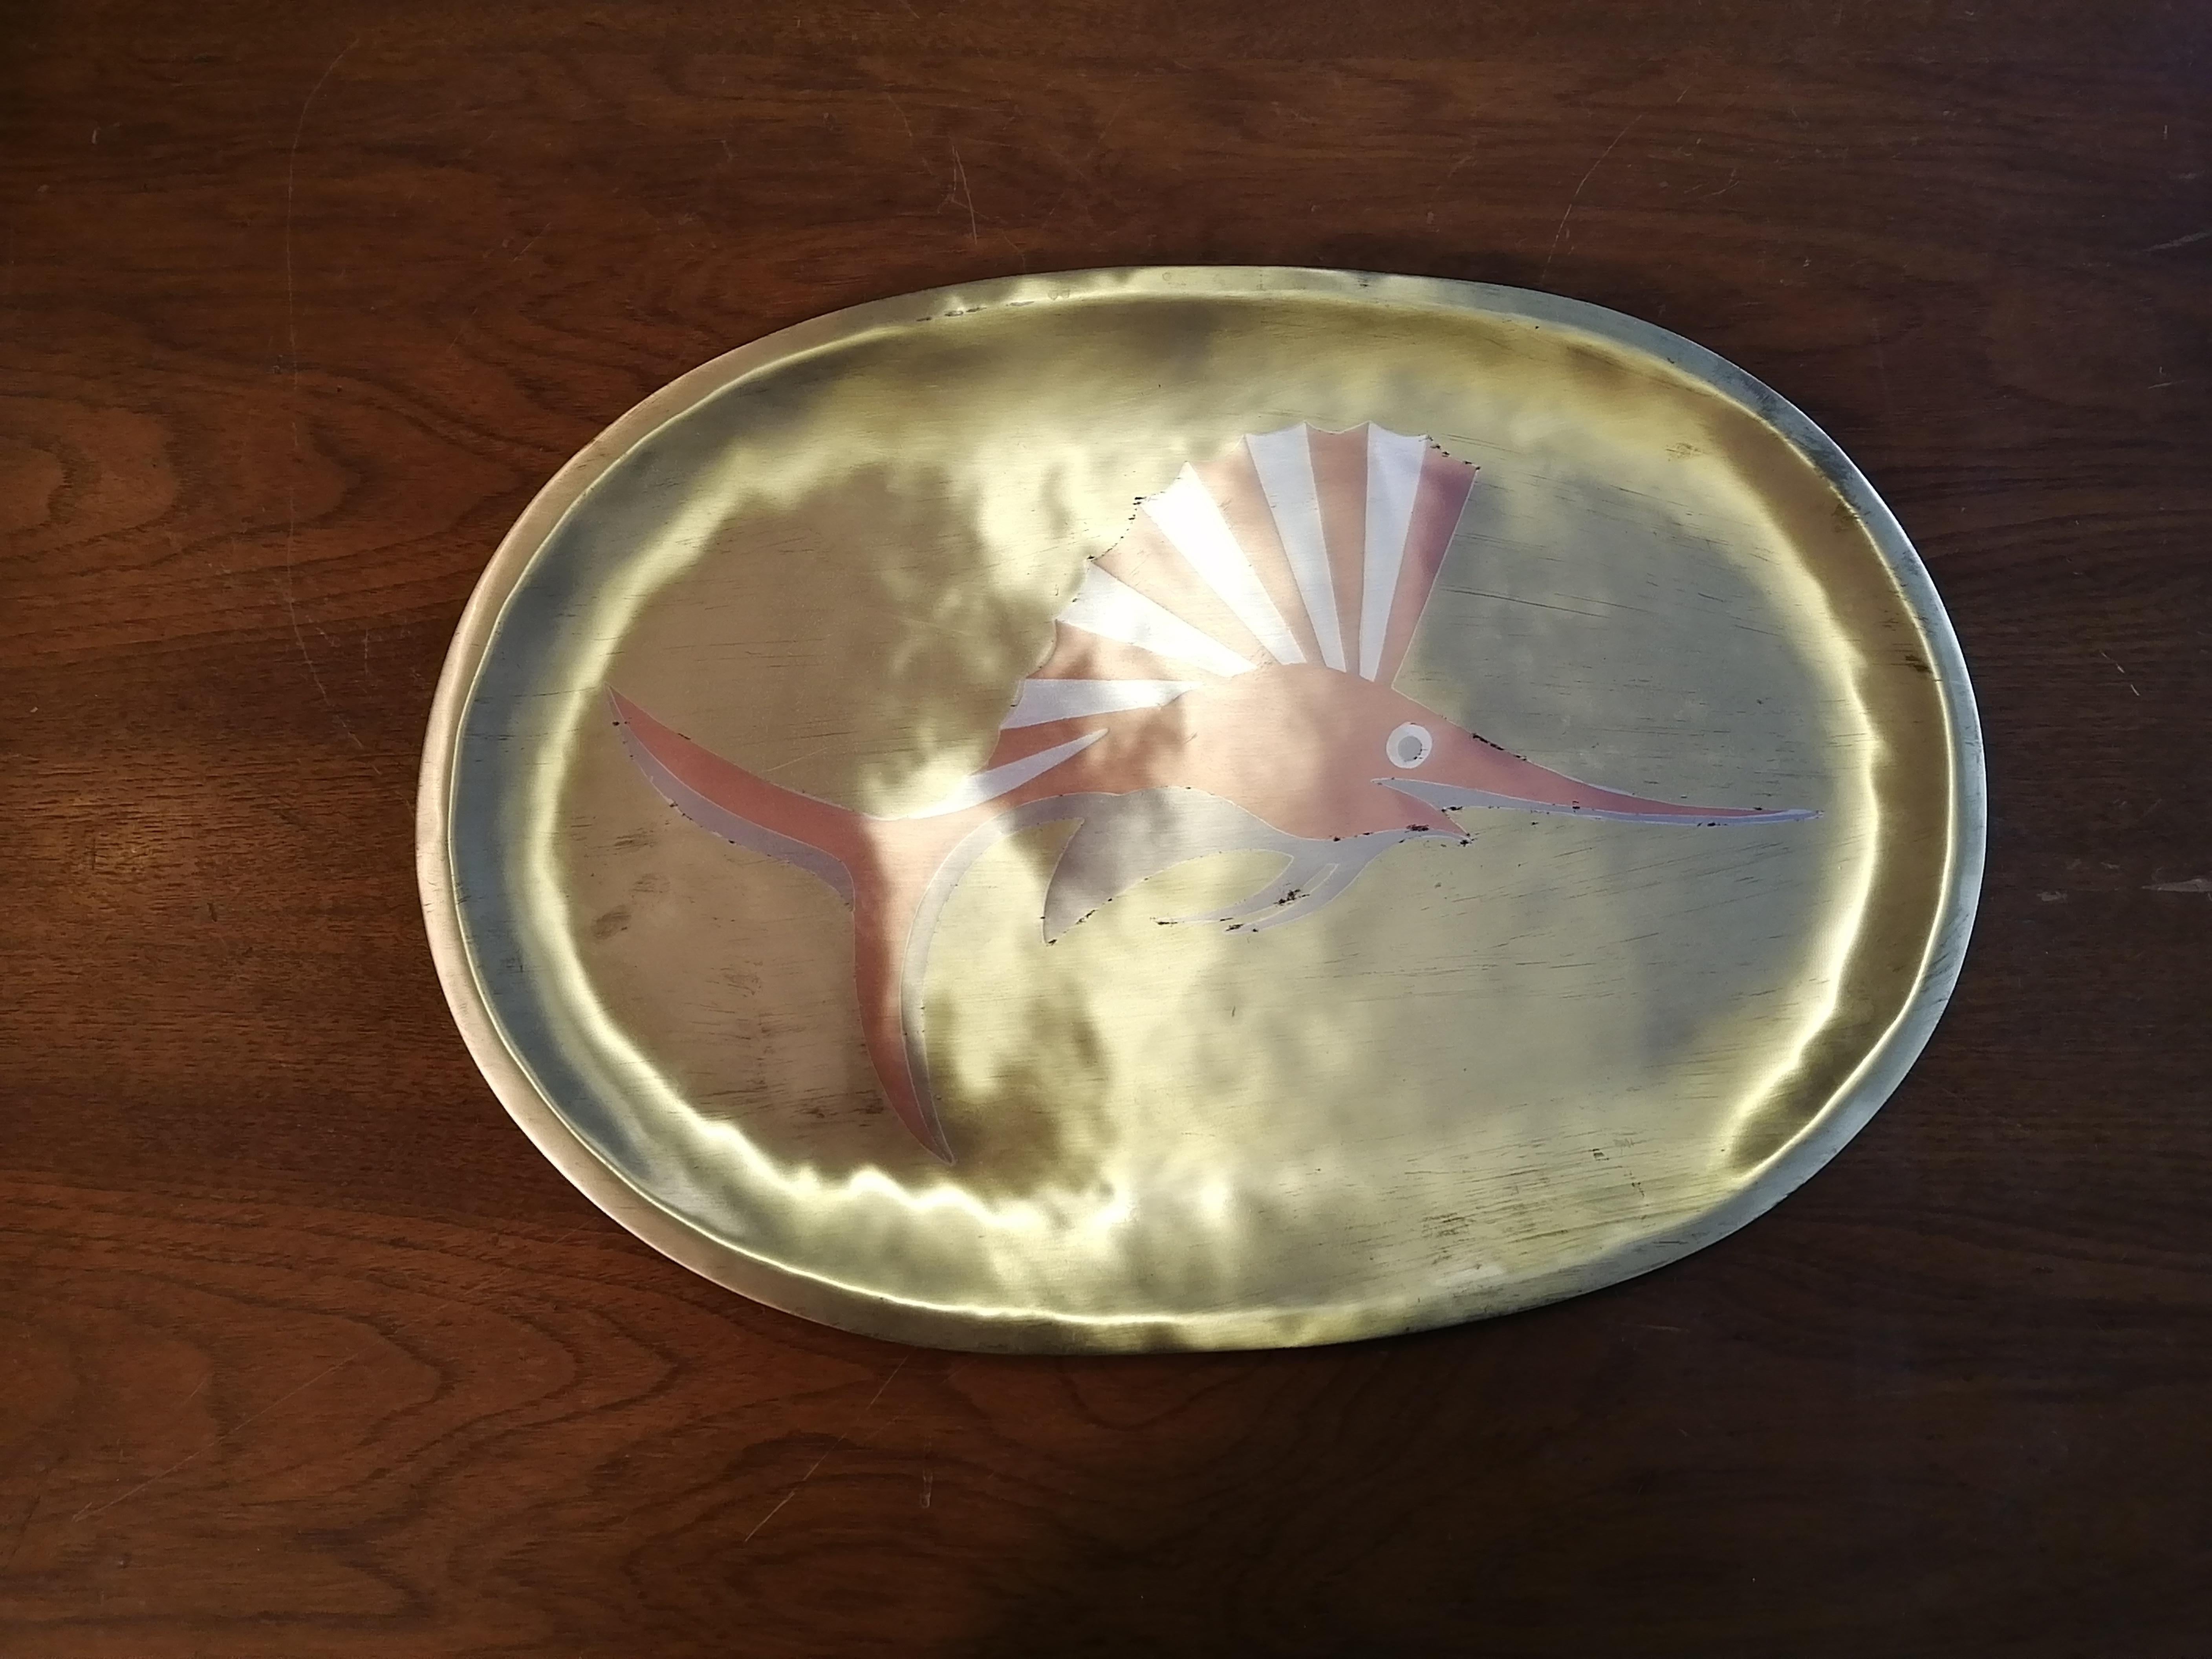 A beautiful Mexican Mid-Century Modern tray made in Metales Casados tecnique by Los Castillo. Taxco, México. The piece features a swordfish. Sealed on back and numbered 257.